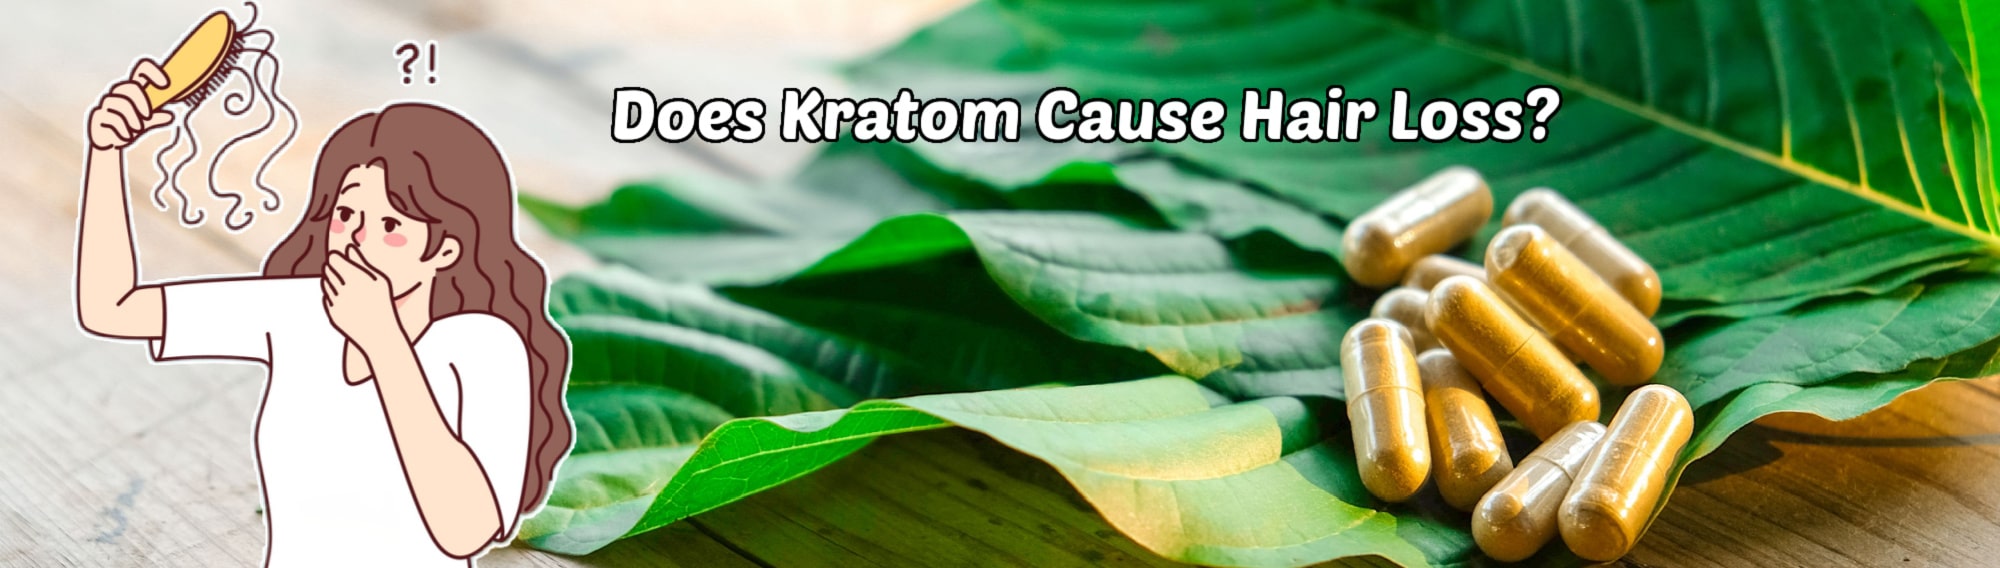 image of does kratom cause hair loss